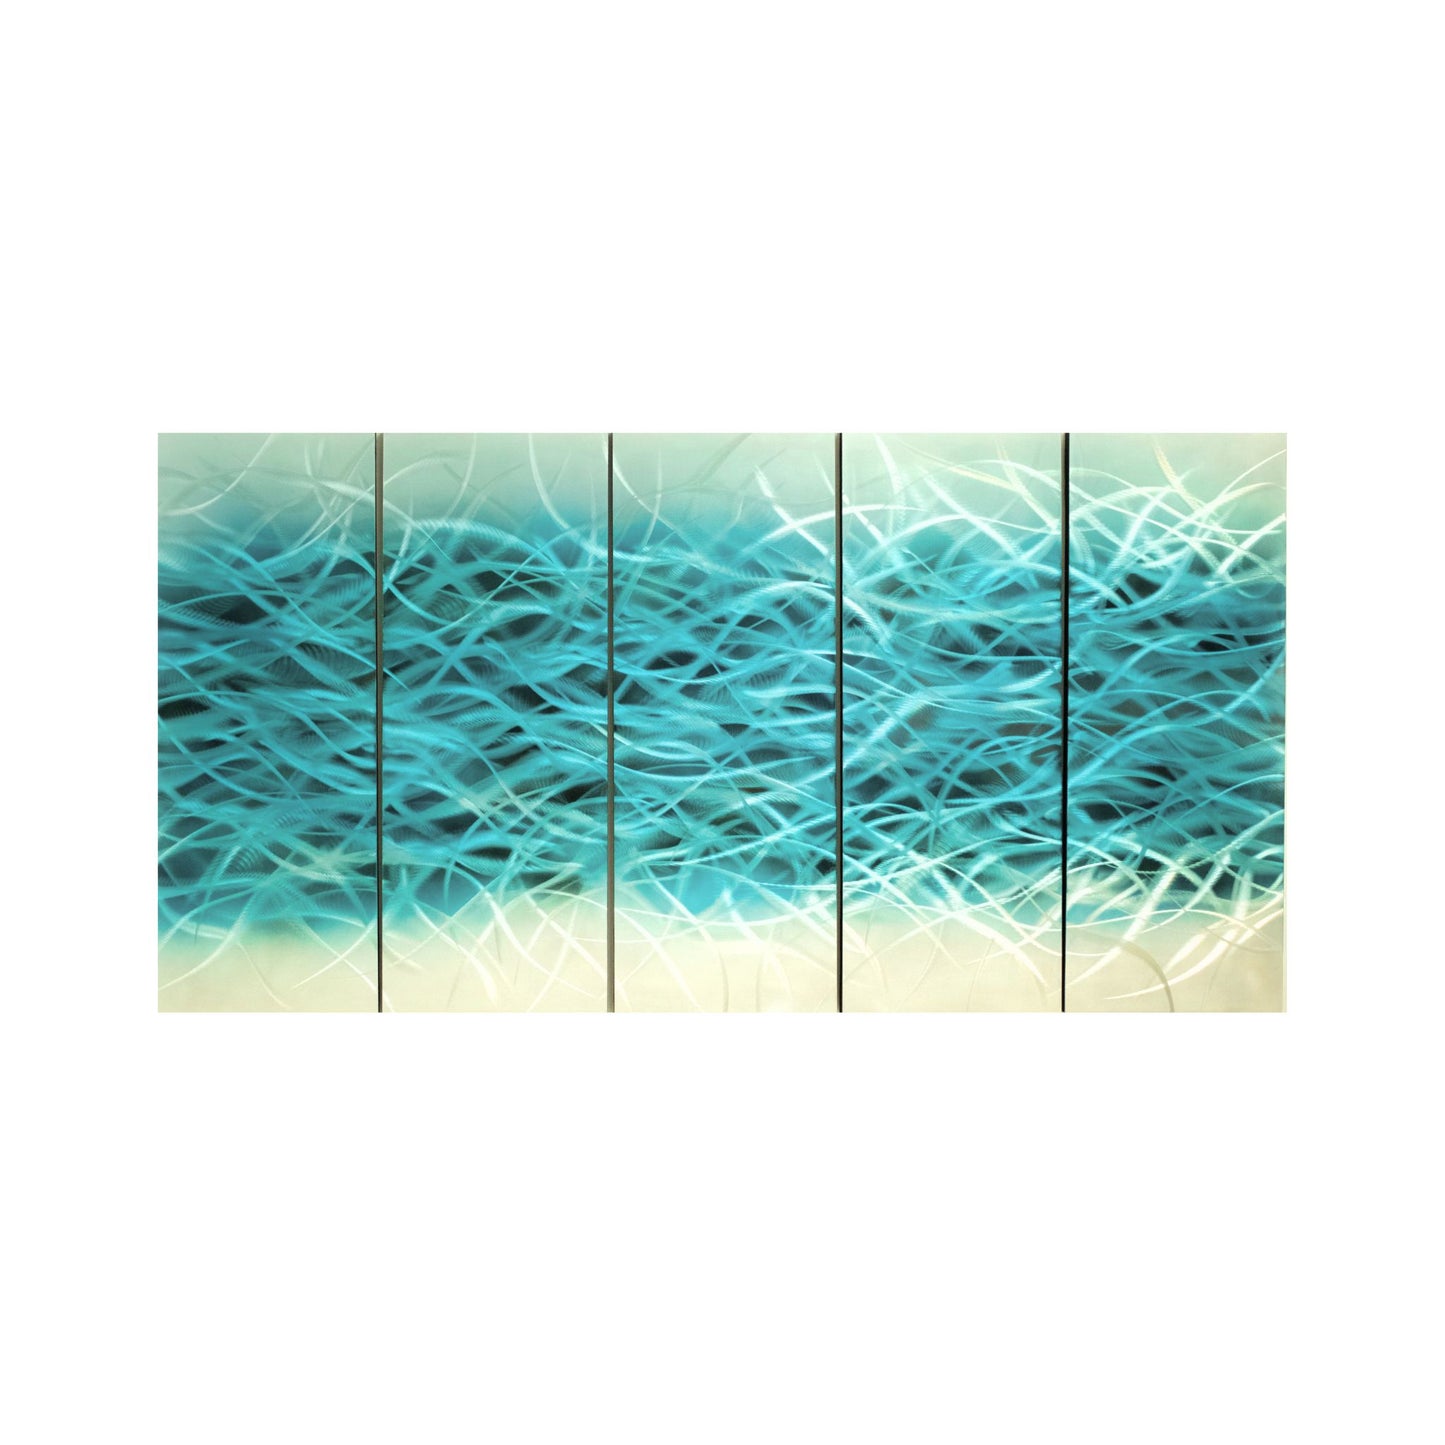 Turquoise Abstract Metal Art Set of 5 Aluminum Panels